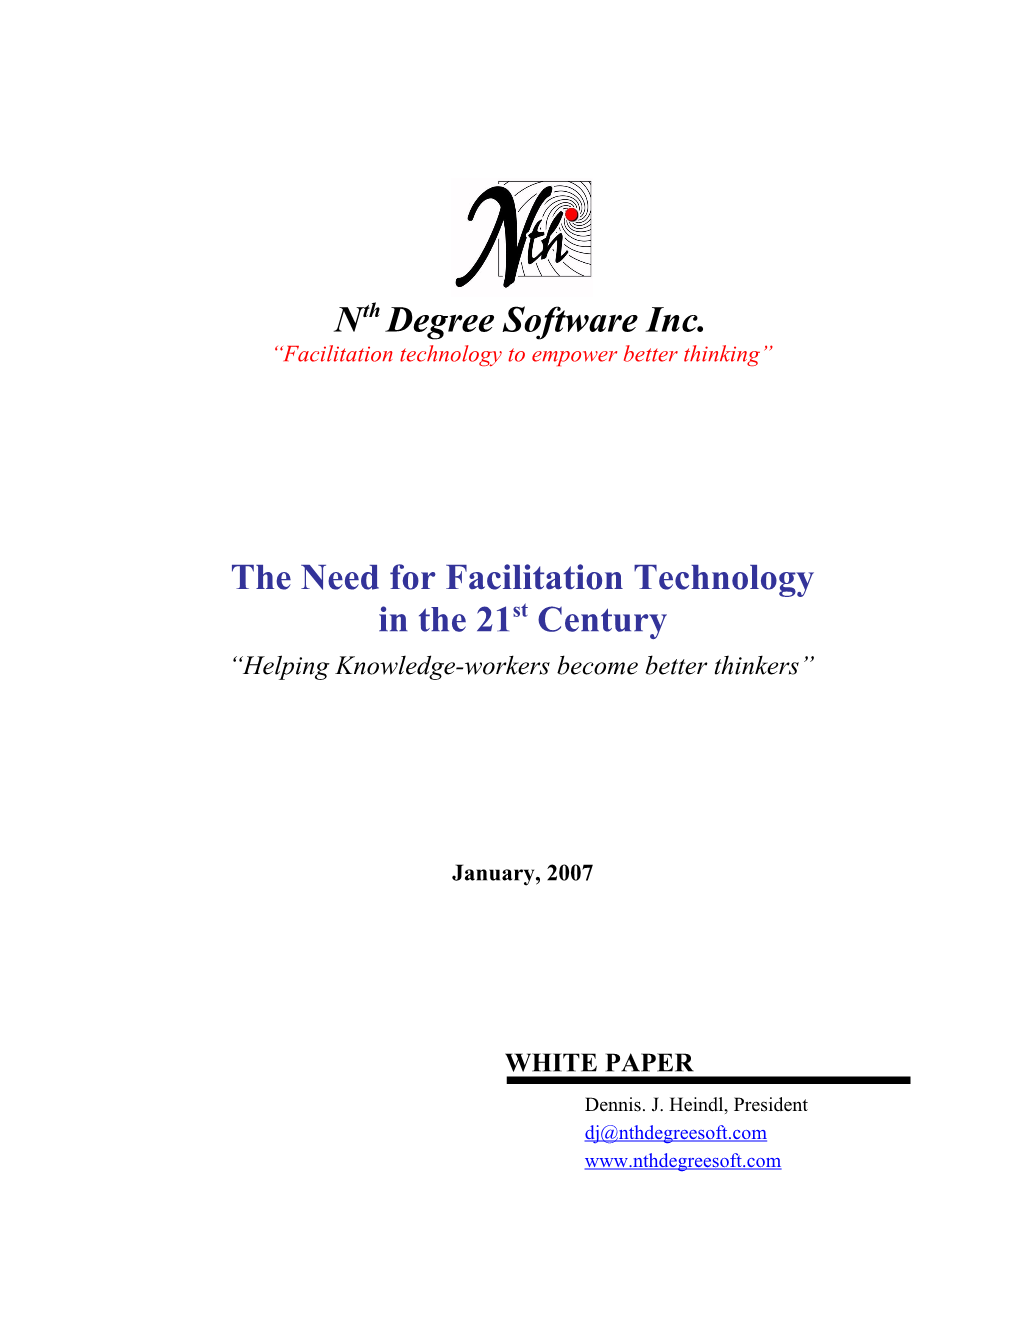 The Need for Facilitation Technology